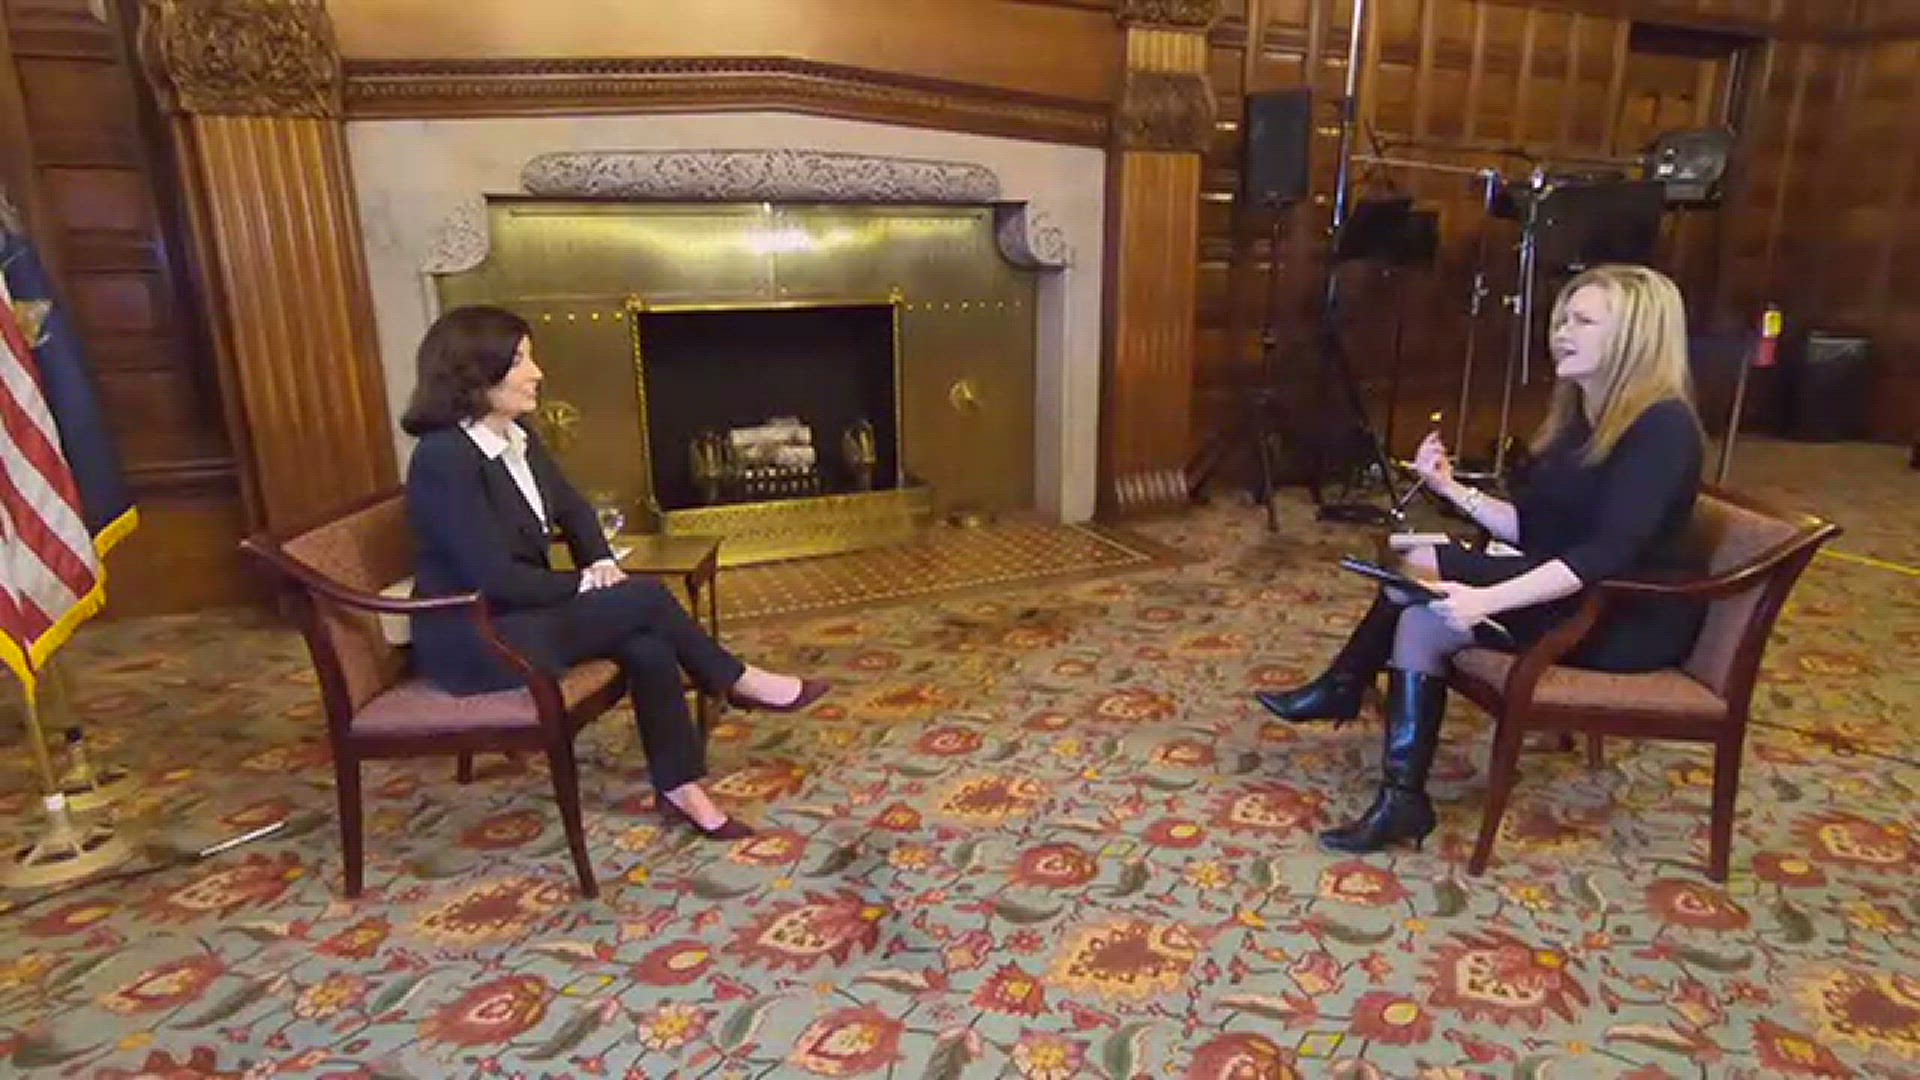 2 On Your Side's Maryalice Demler sat down with New York Gov. Kathy Hochul to discuss her time in office, bail reform, and gun control.